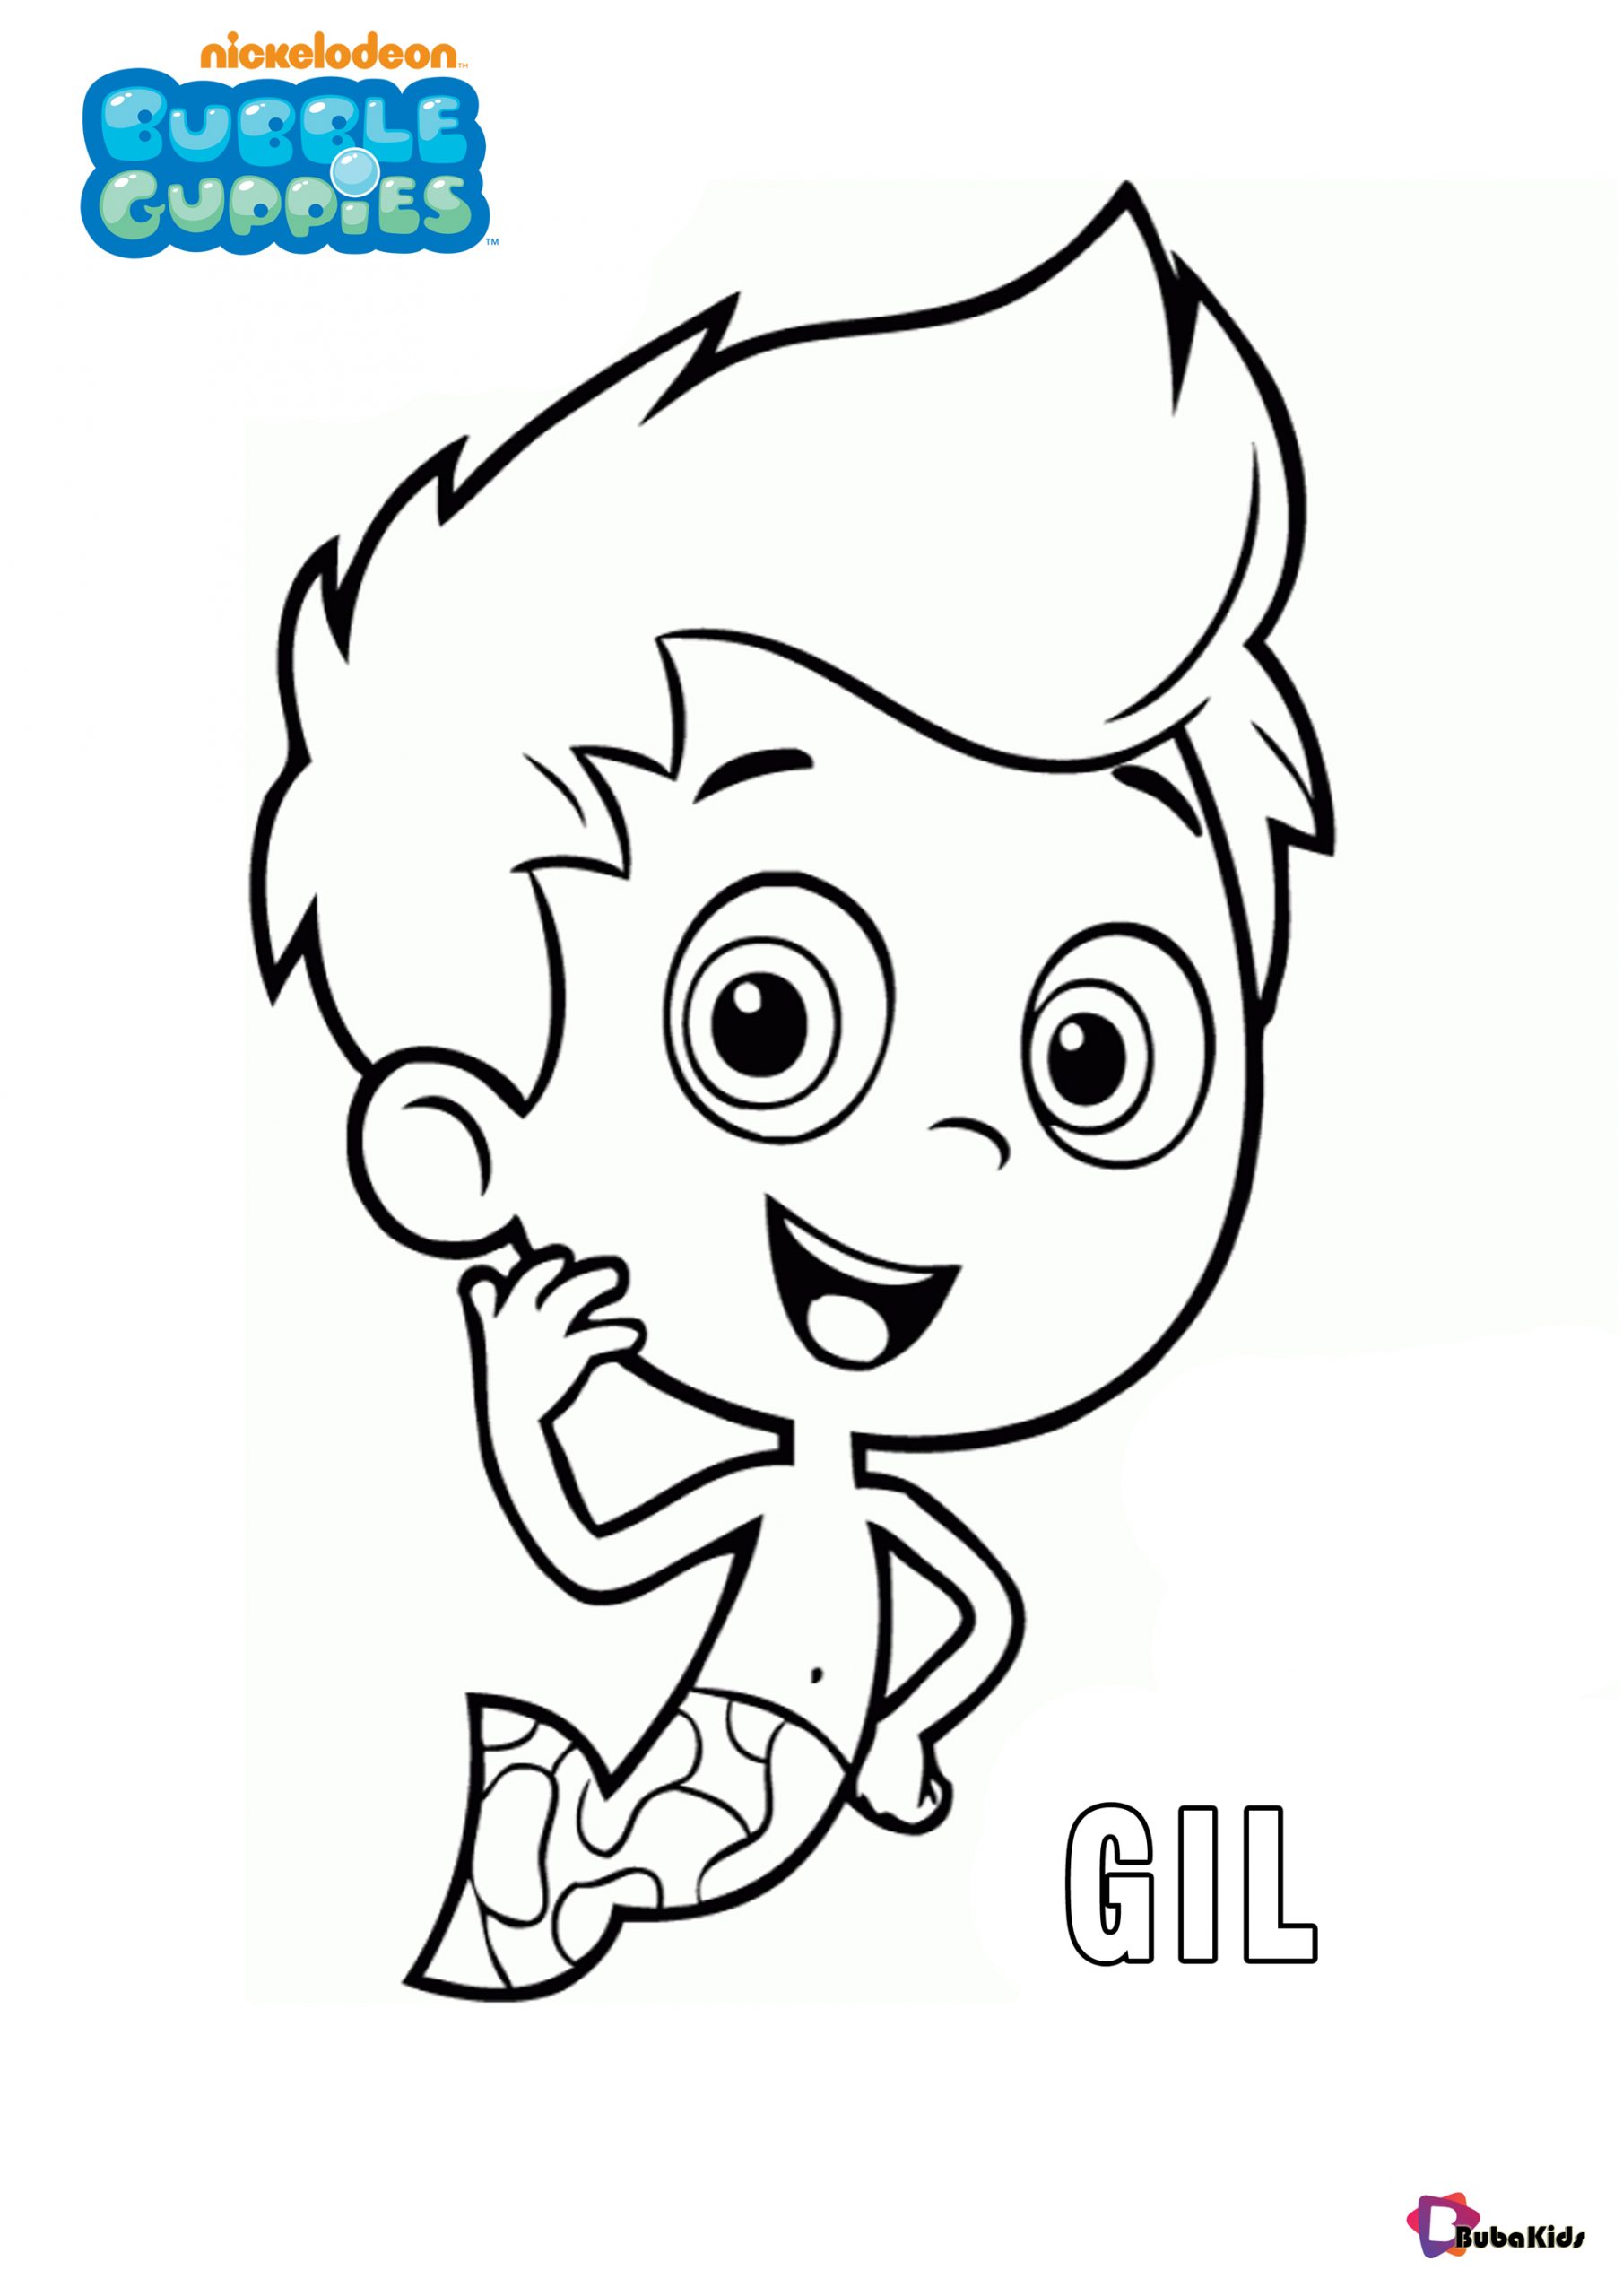 Free and Printable Bubble Guppies character Gil coloring pages Wallpaper